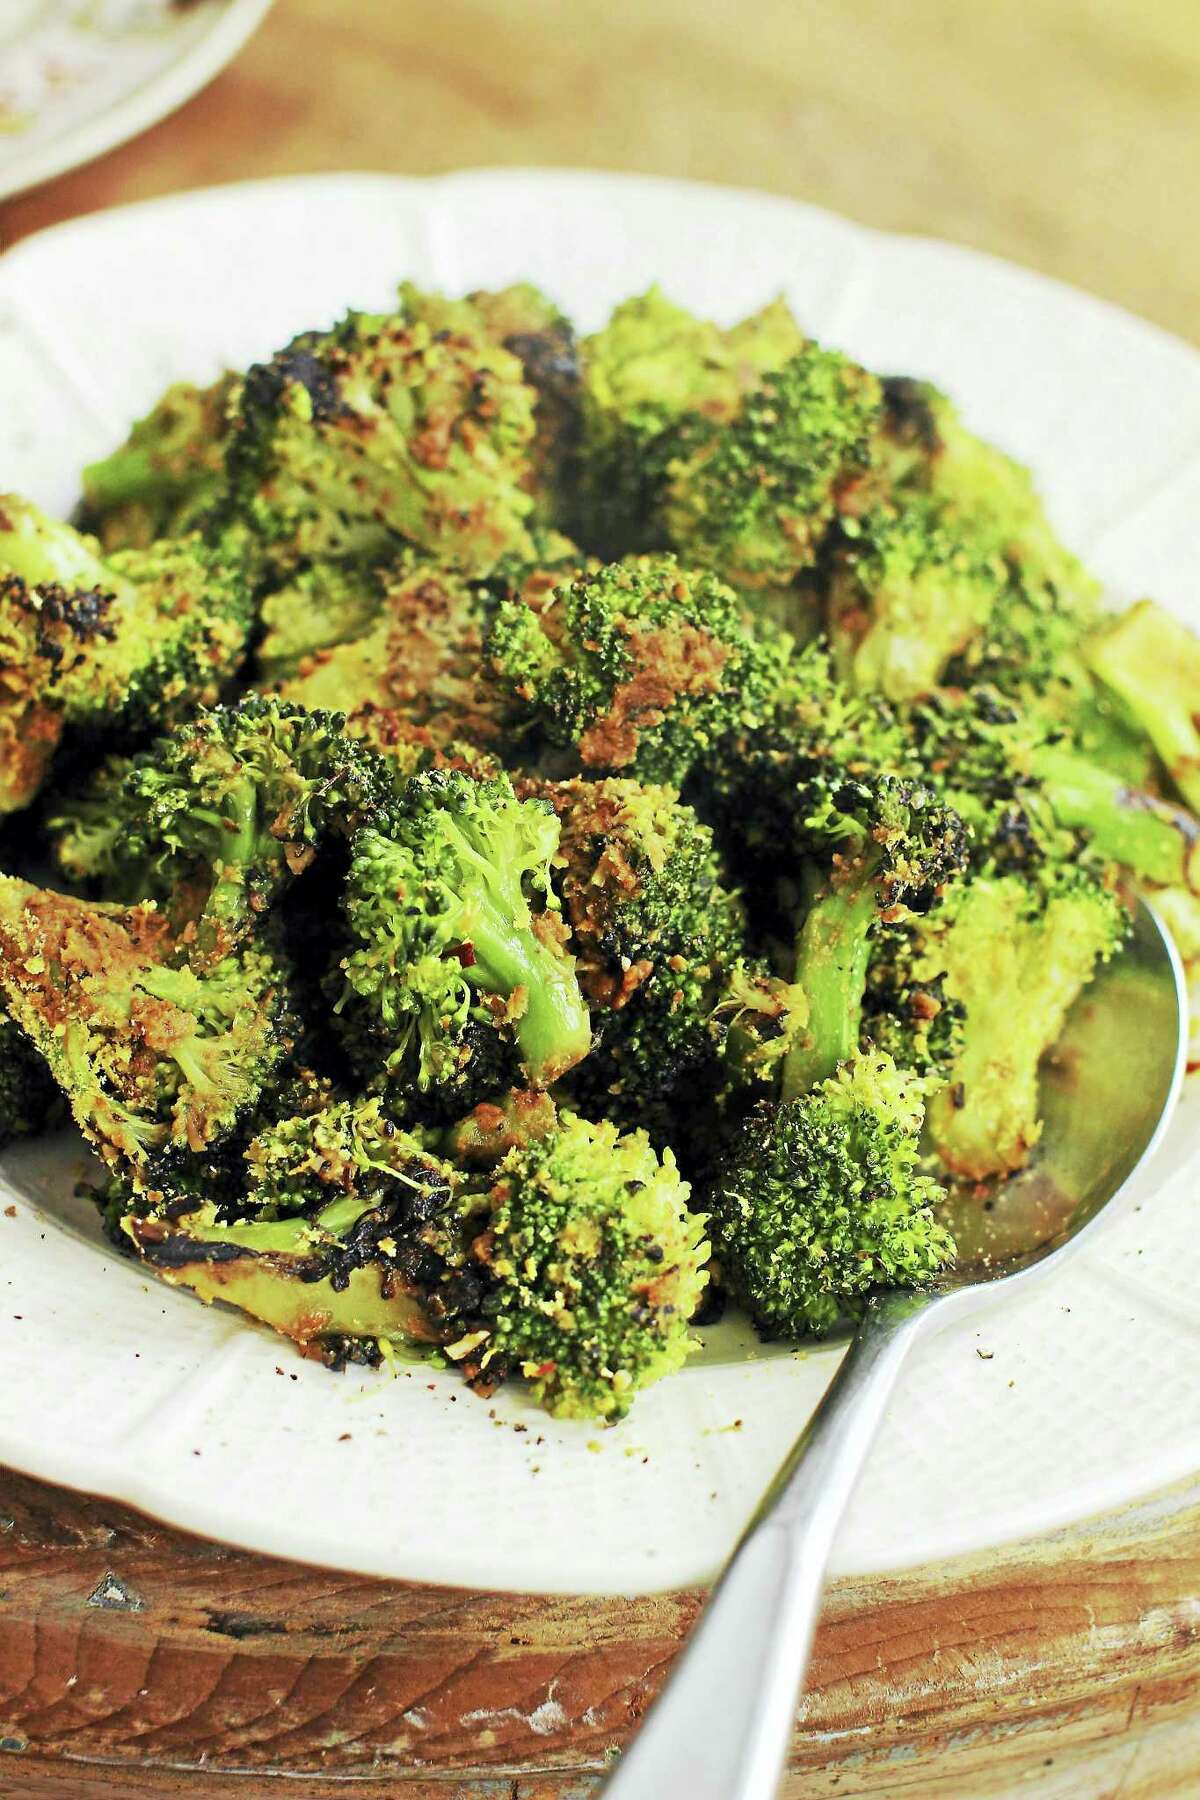 This recipe gives you both a new way to season and a speedy way to roast broccoli.